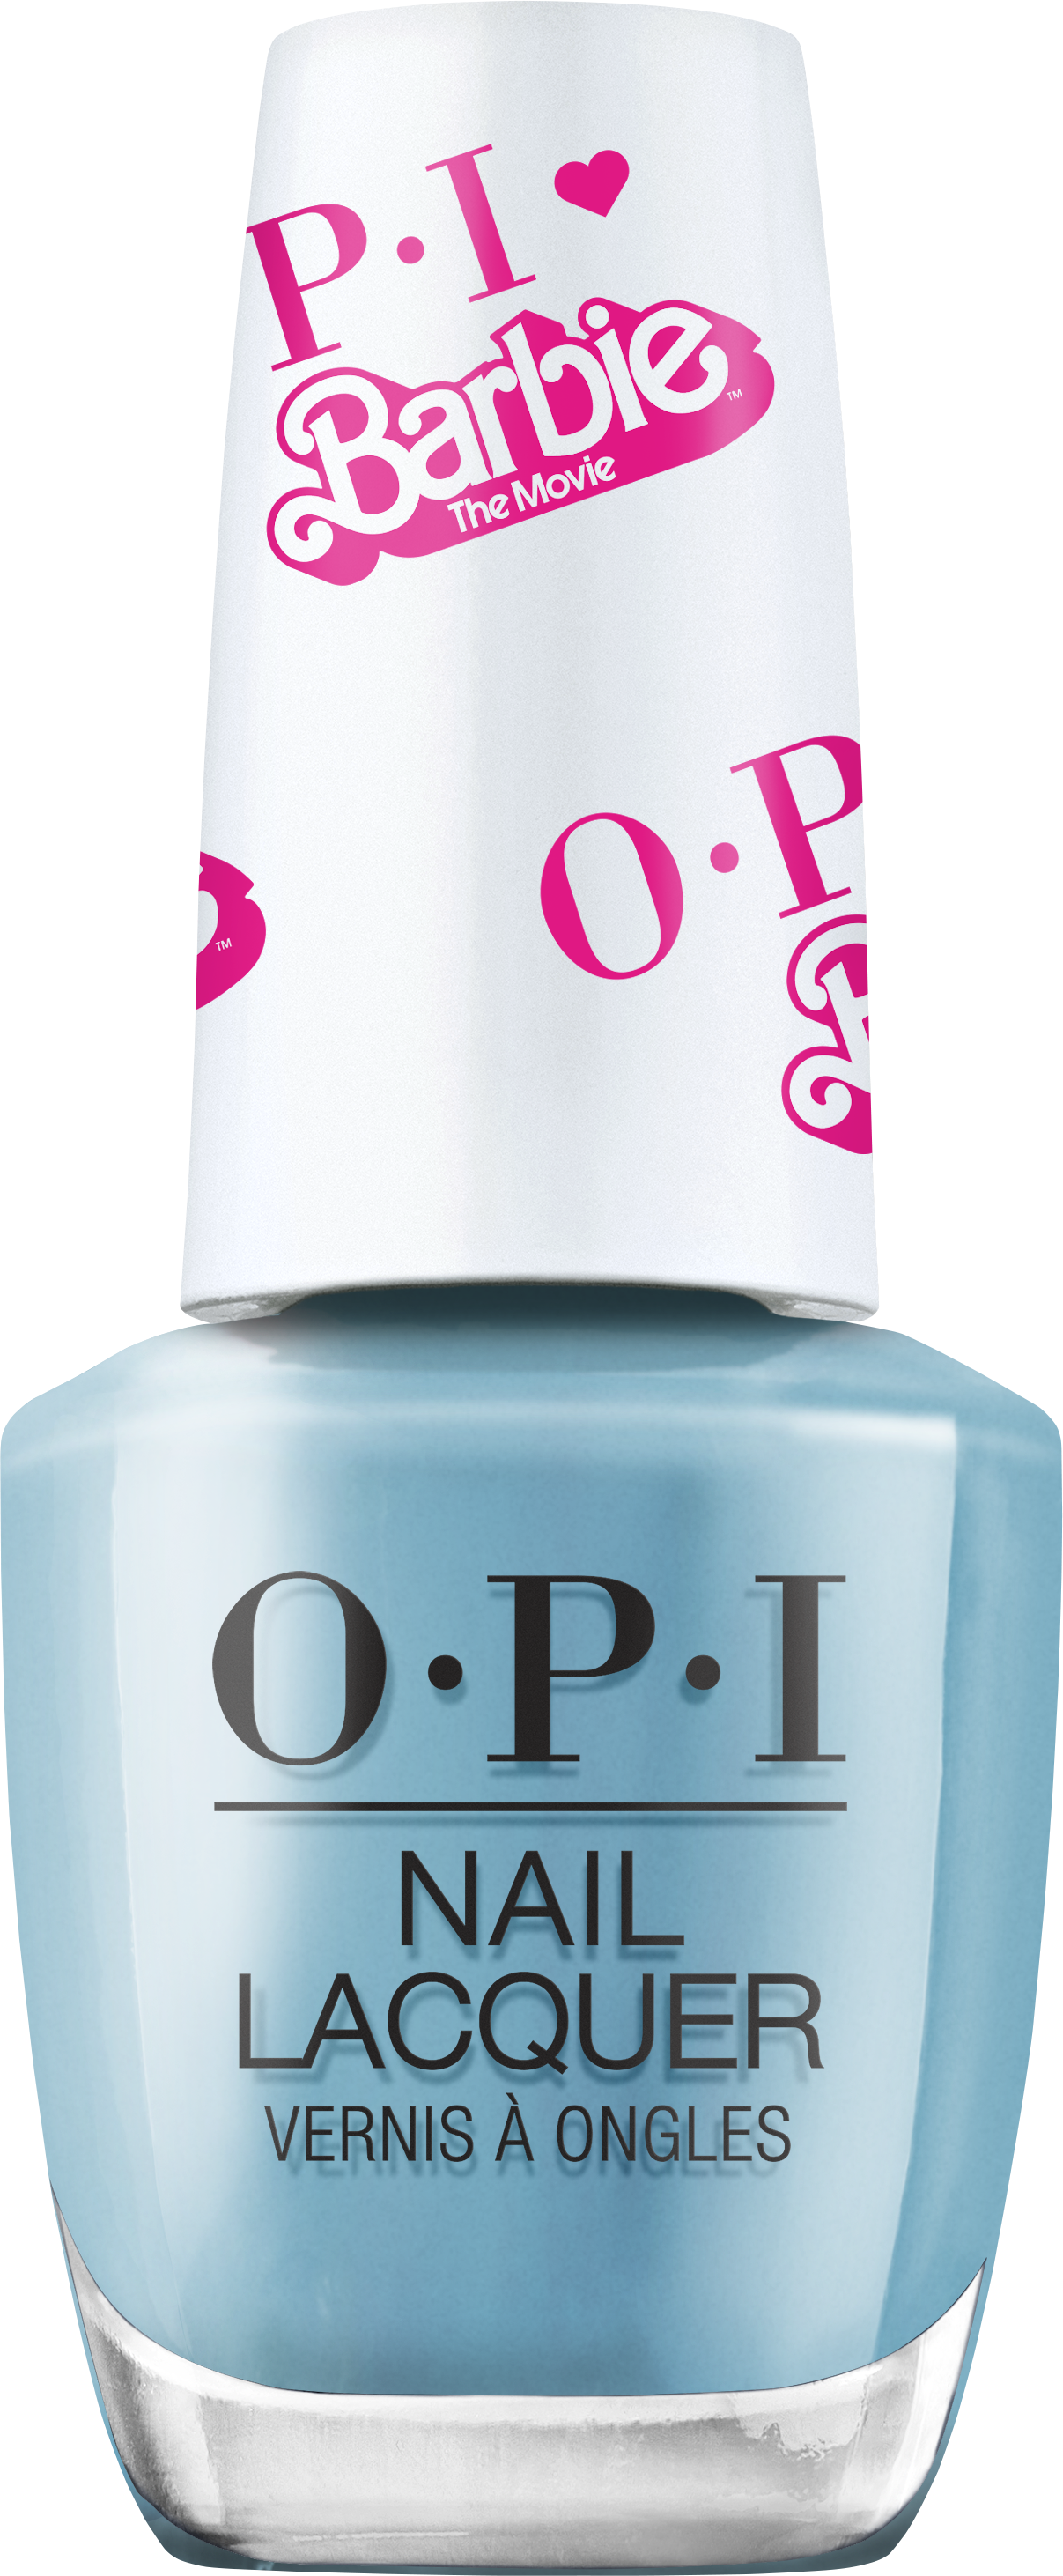 4064665125726 - OPI NAIL LACQUER, OPAQUE CRÈME FINISH BLUE NAIL POLISH, UP TO 7 DAYS OF WEAR, CHIP RESISTANT & FAST DRYING, OPIXBARBIE LIMITED EDITION COLLECTION, MY JOB IS BEACH, 0.5 FL OZ